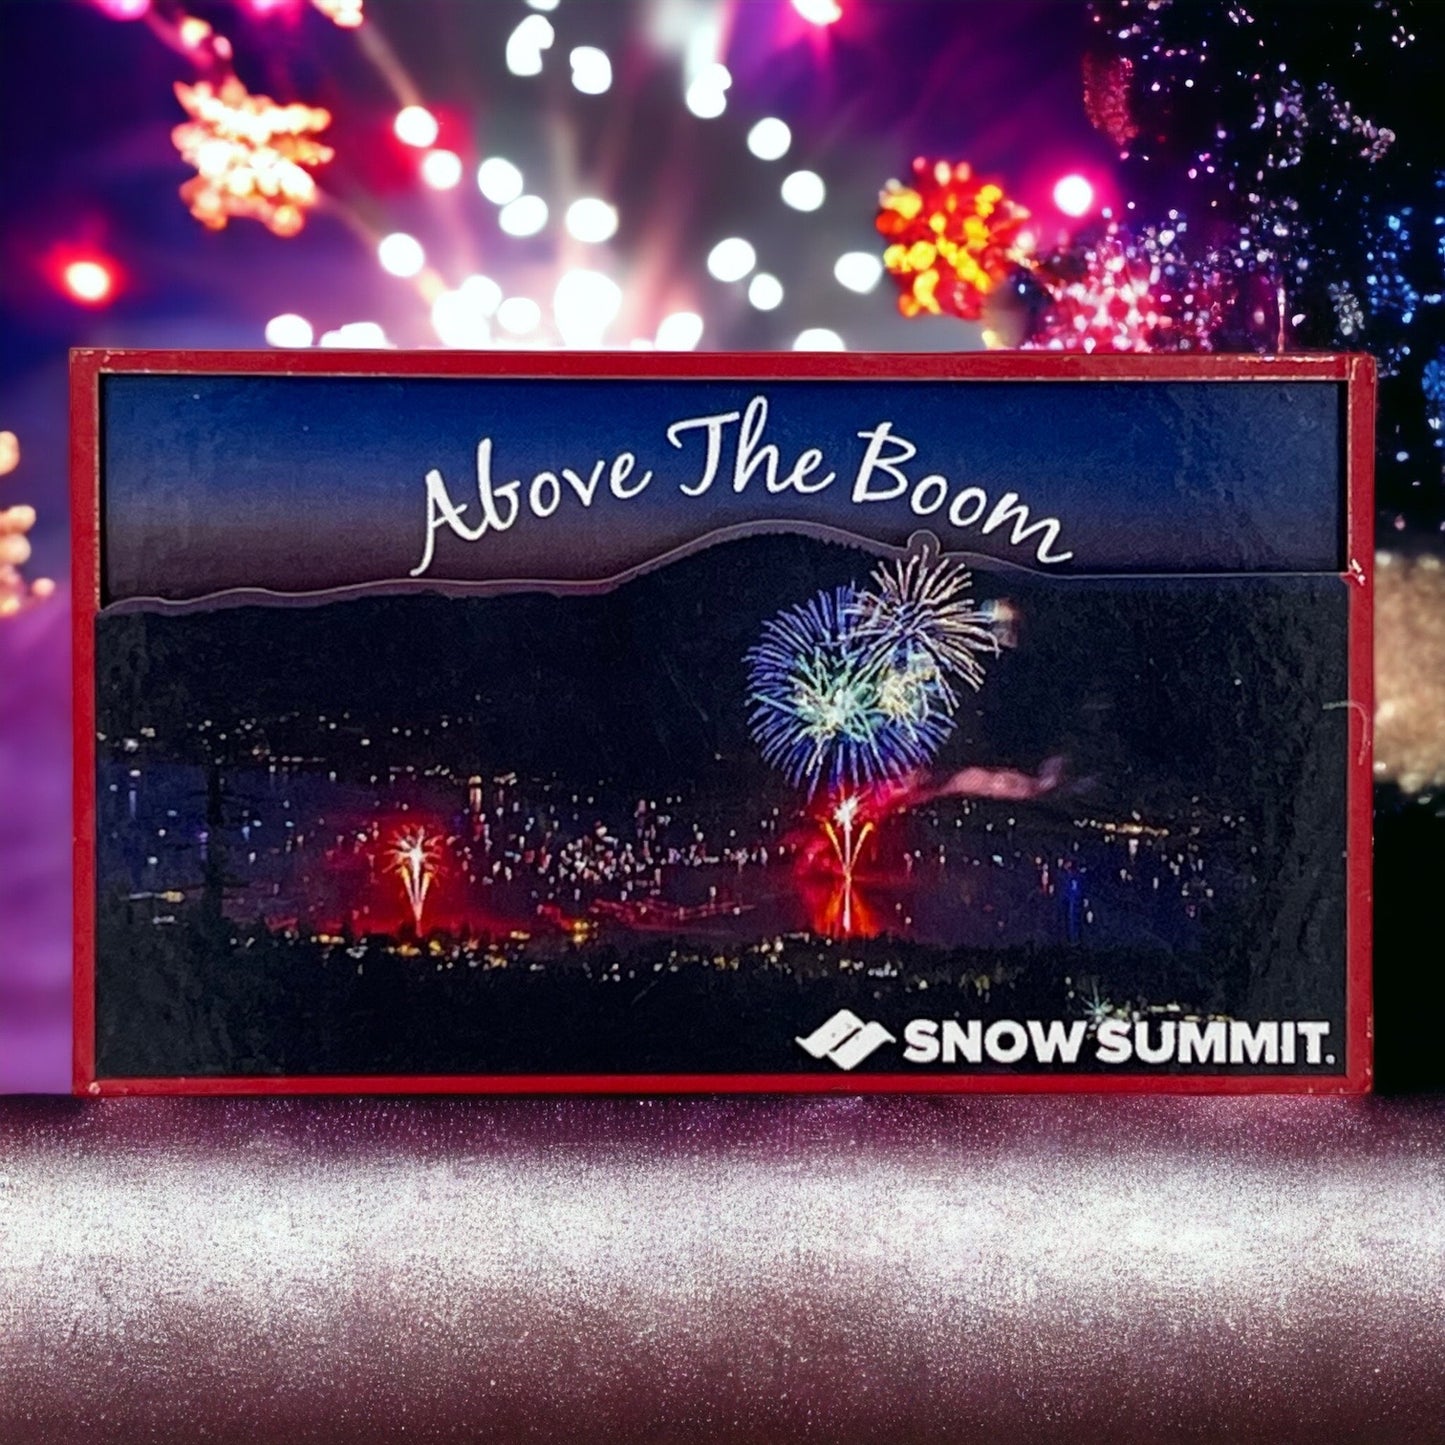 Above The Boom fireworks over the Big Bear Lake and Snow Summit.